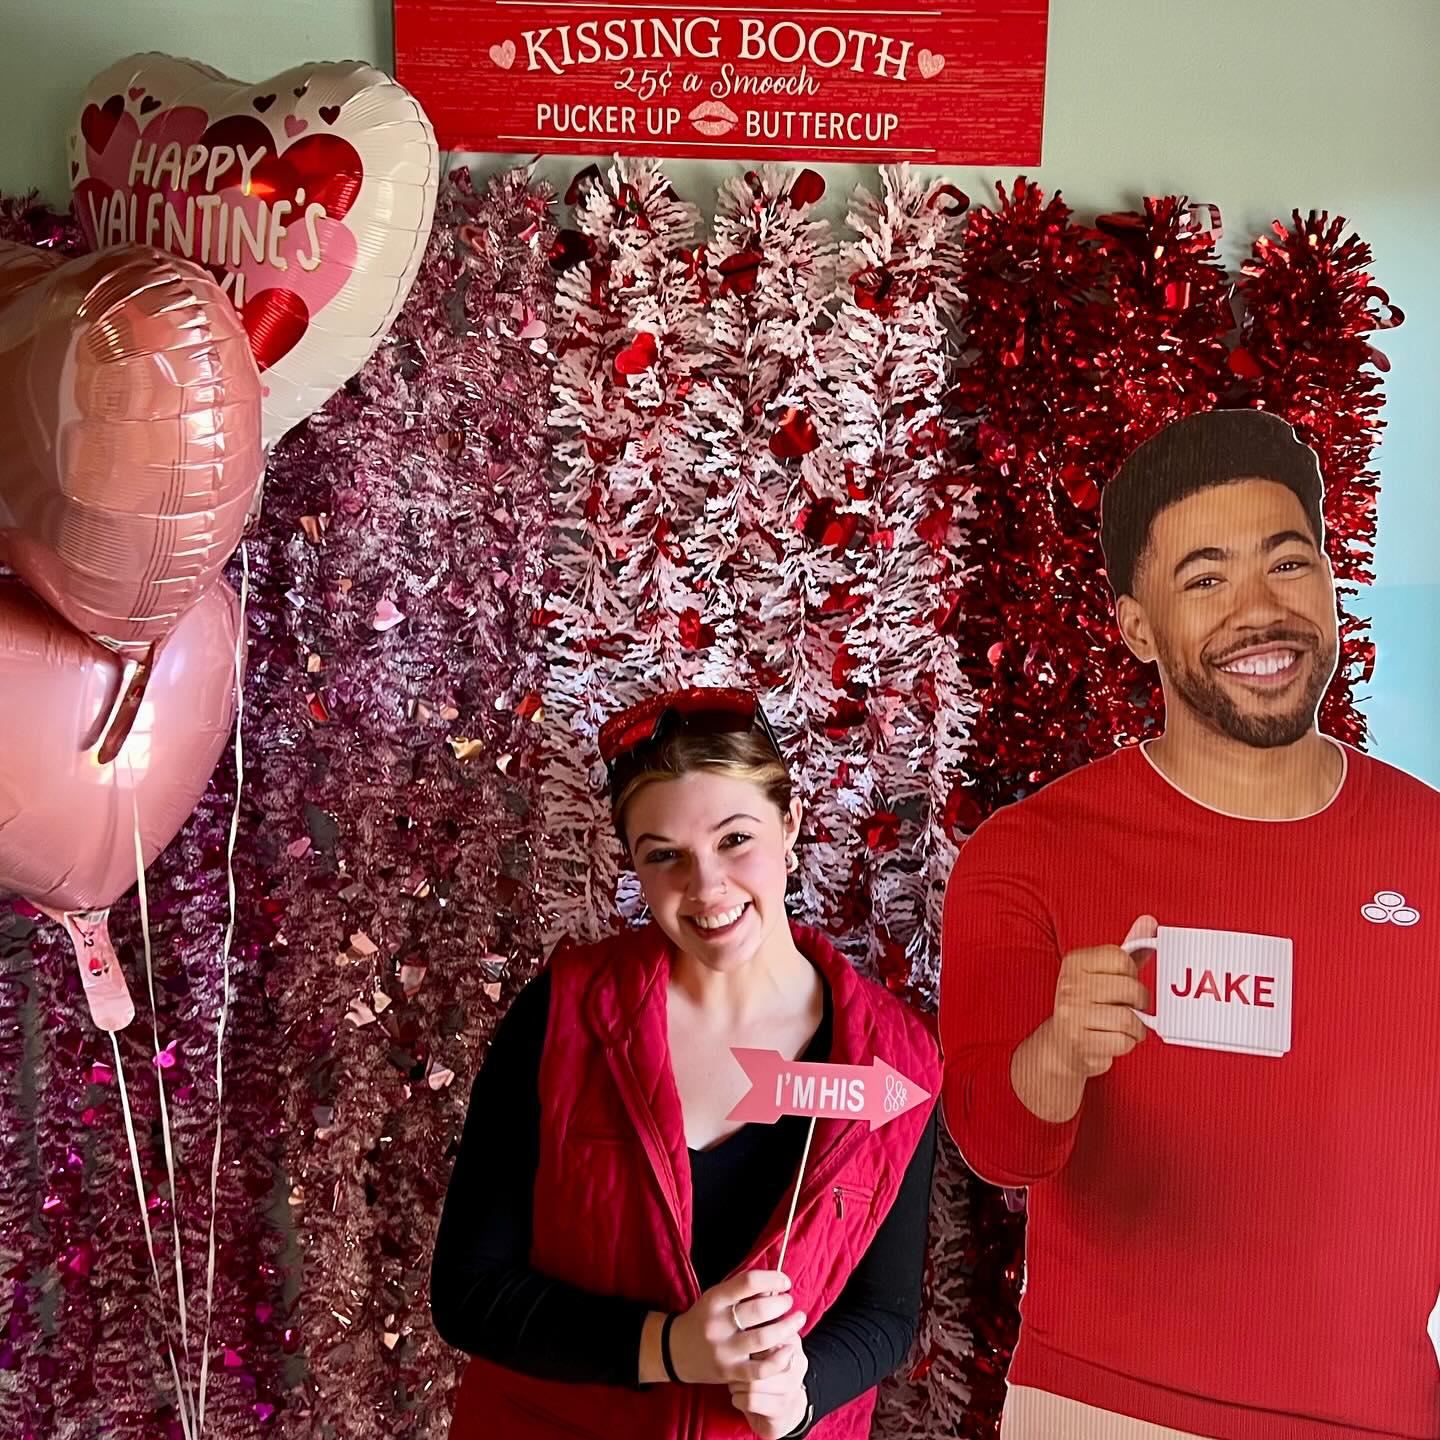 Thank you to everyone that stopped by to get their picture with Jake. We had fun with it. Even though Valentine's Day has passed - the opportunity to #InsureYourLove with life insurance hasn't! Contact us today to see how affordable it is to insure your love. ❤